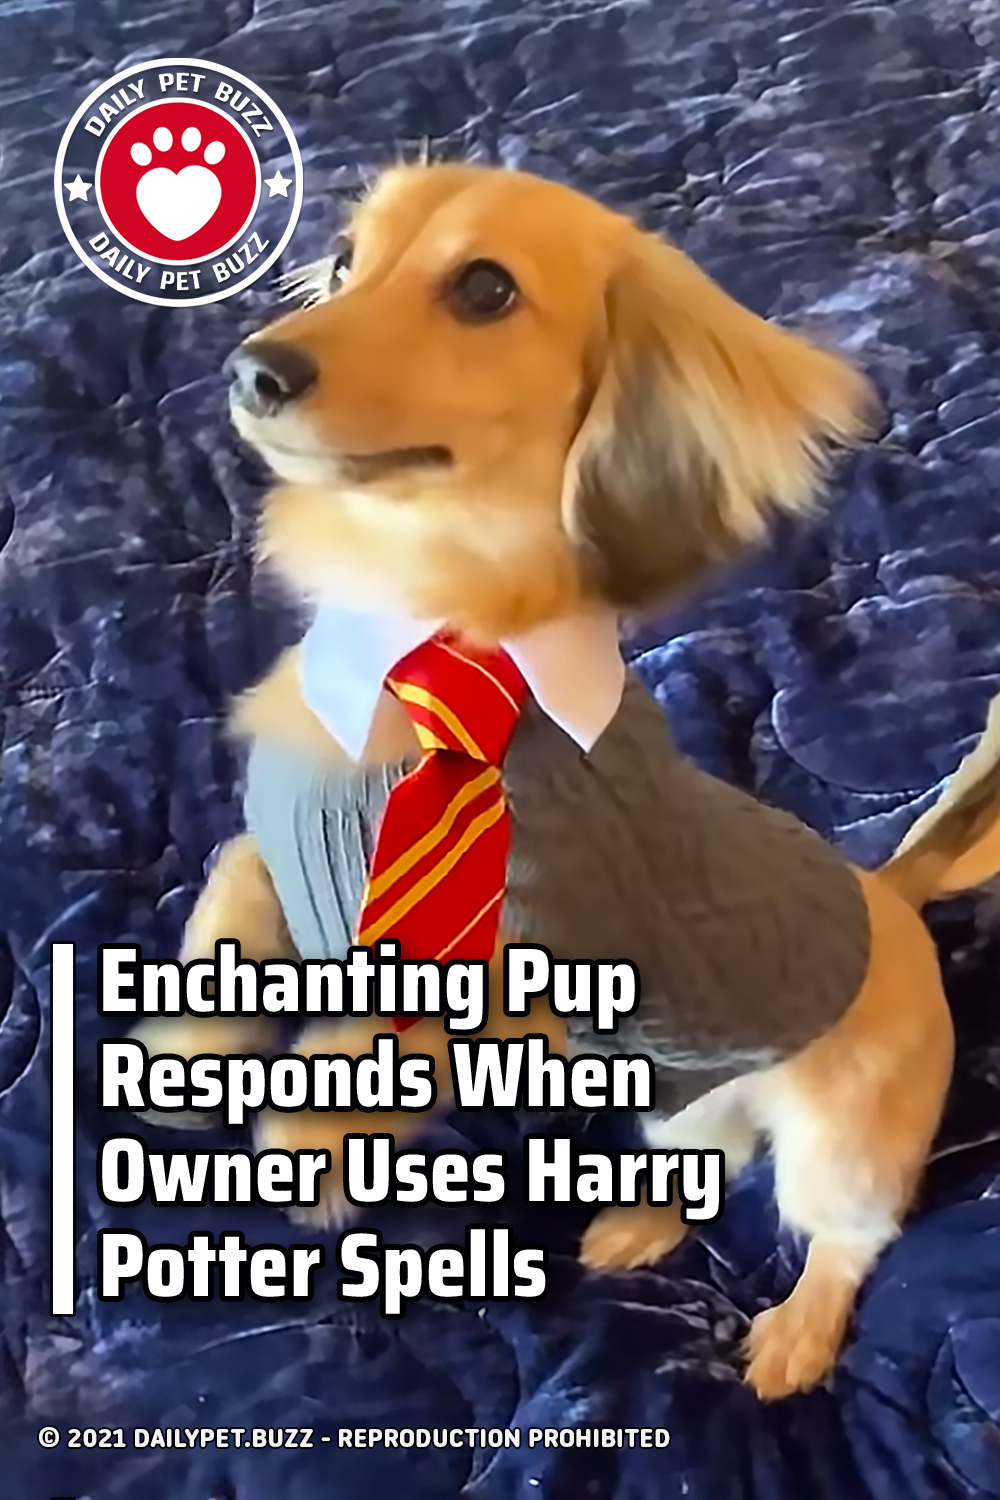 Enchanting Pup Responds When Owner Uses Harry Potter Spells